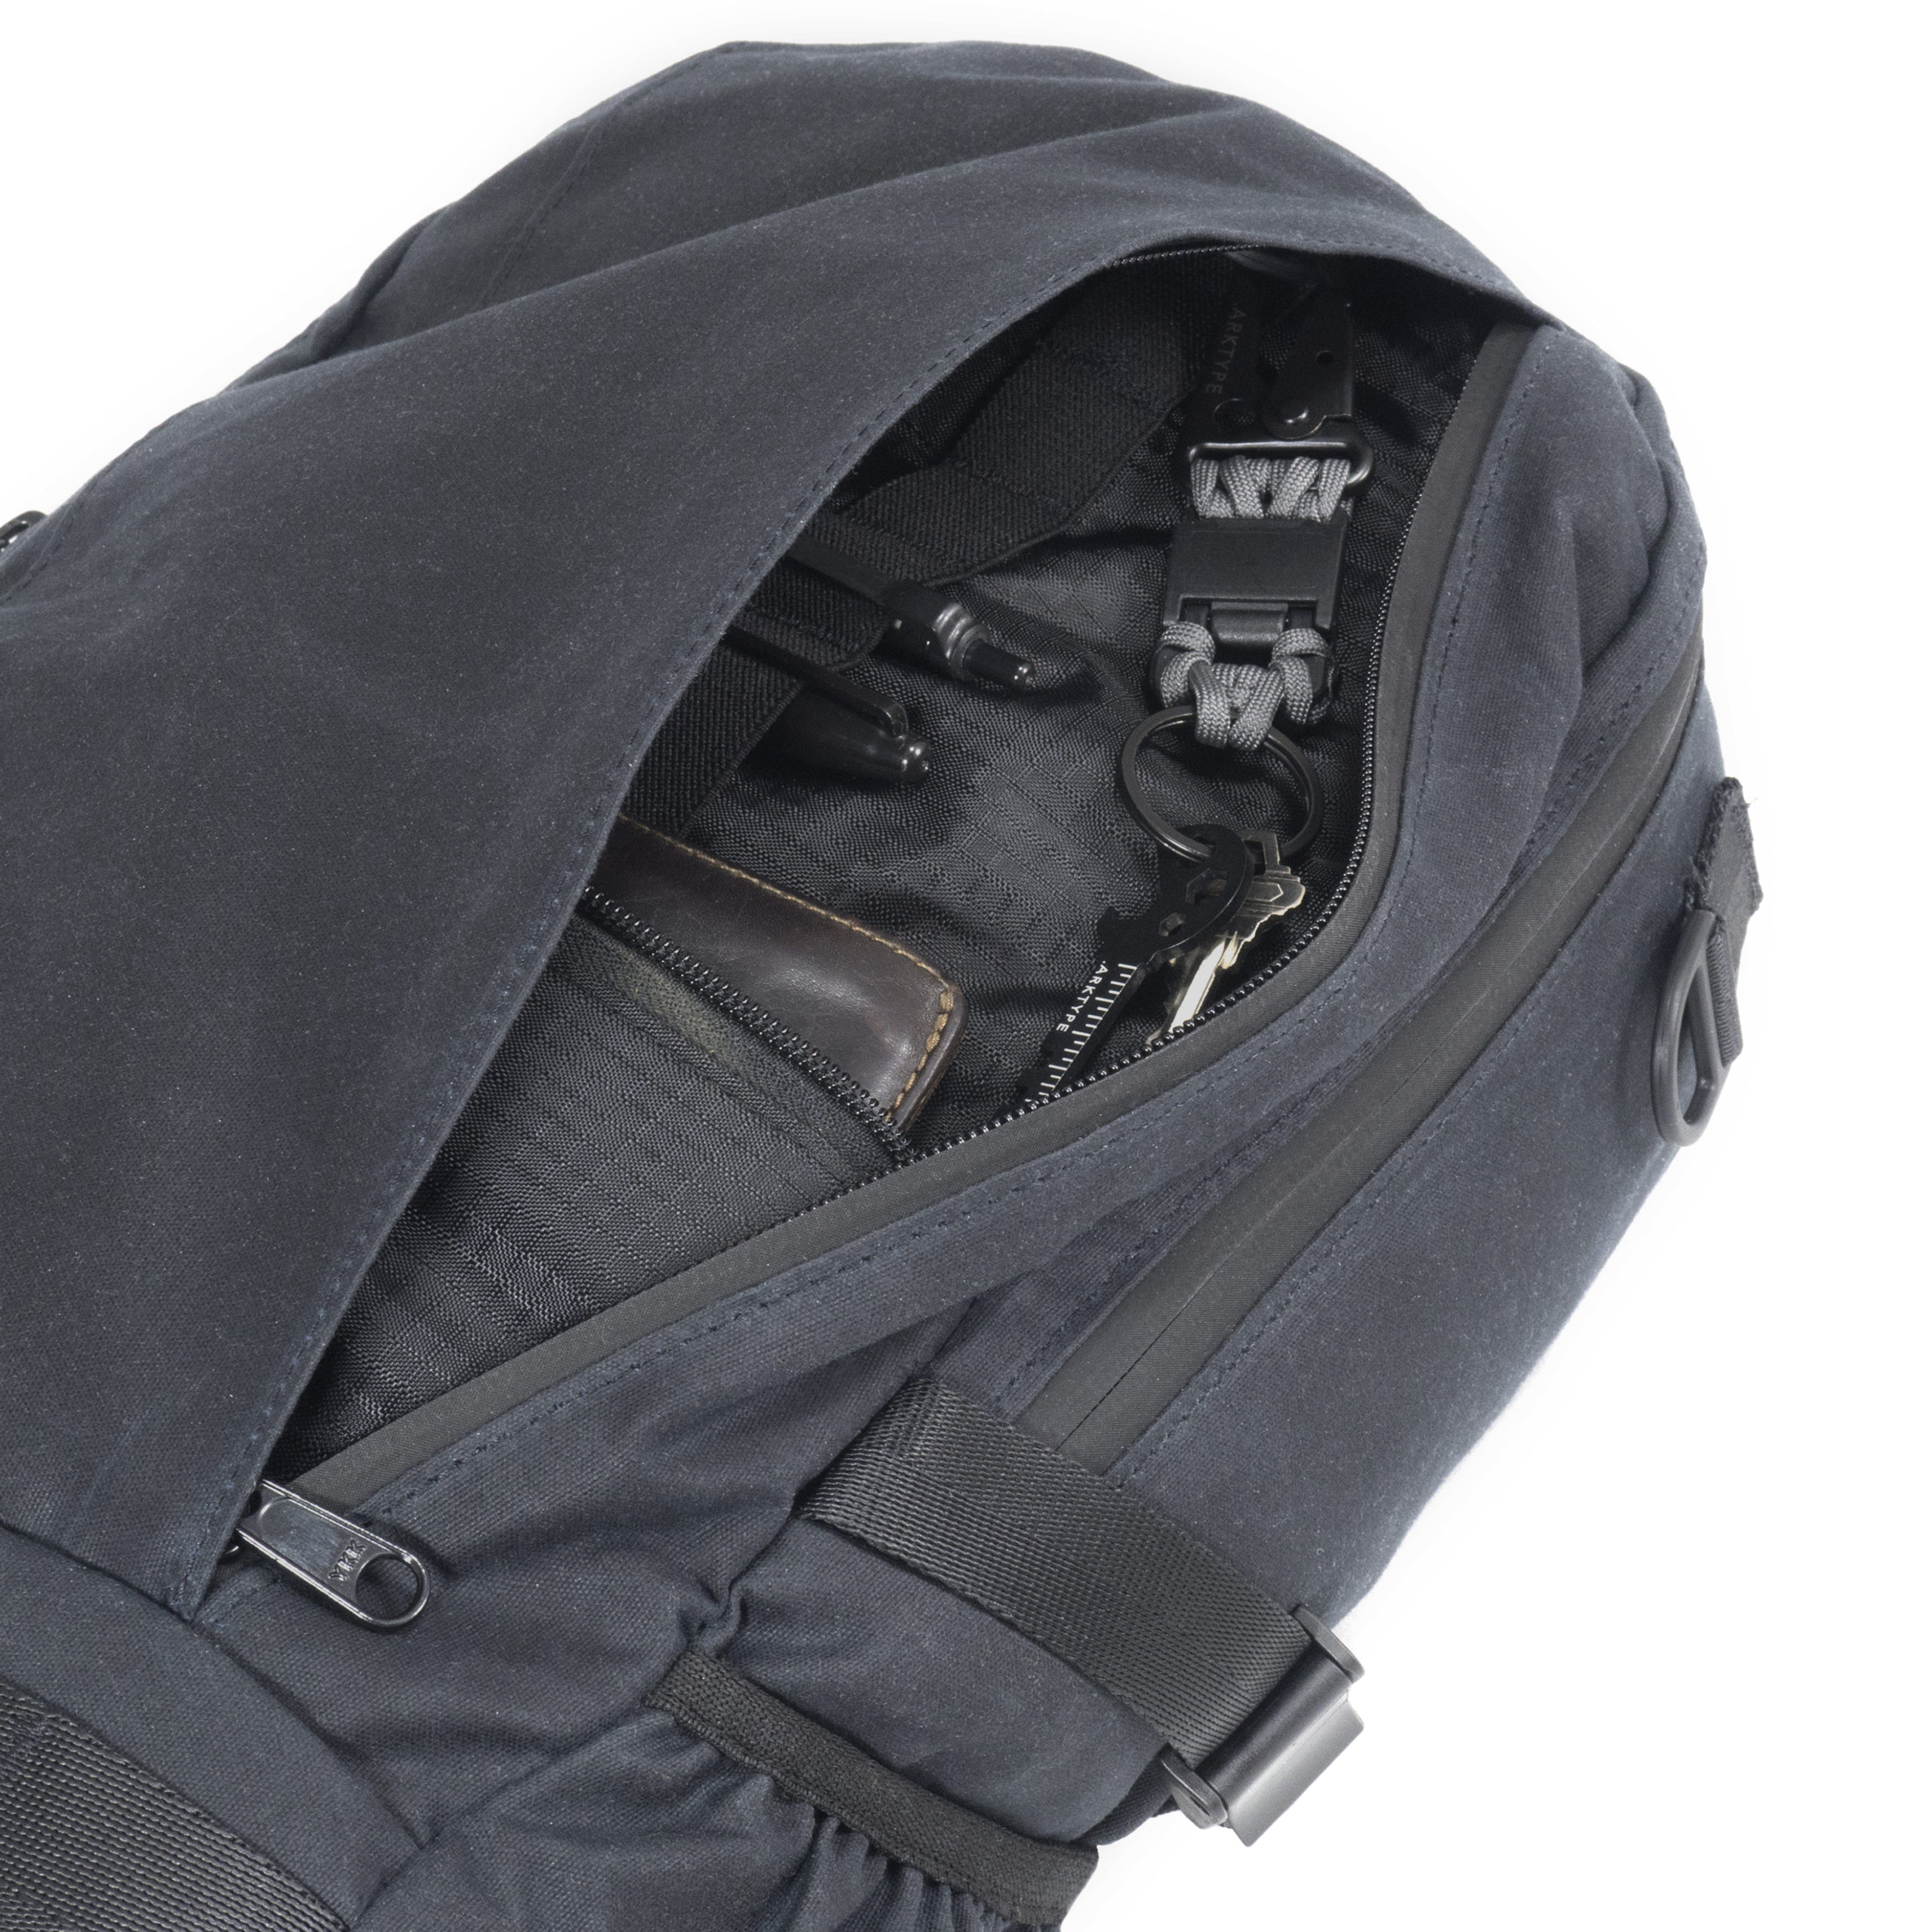 ARKTYPE Update Their Line With the 22L Jetpack